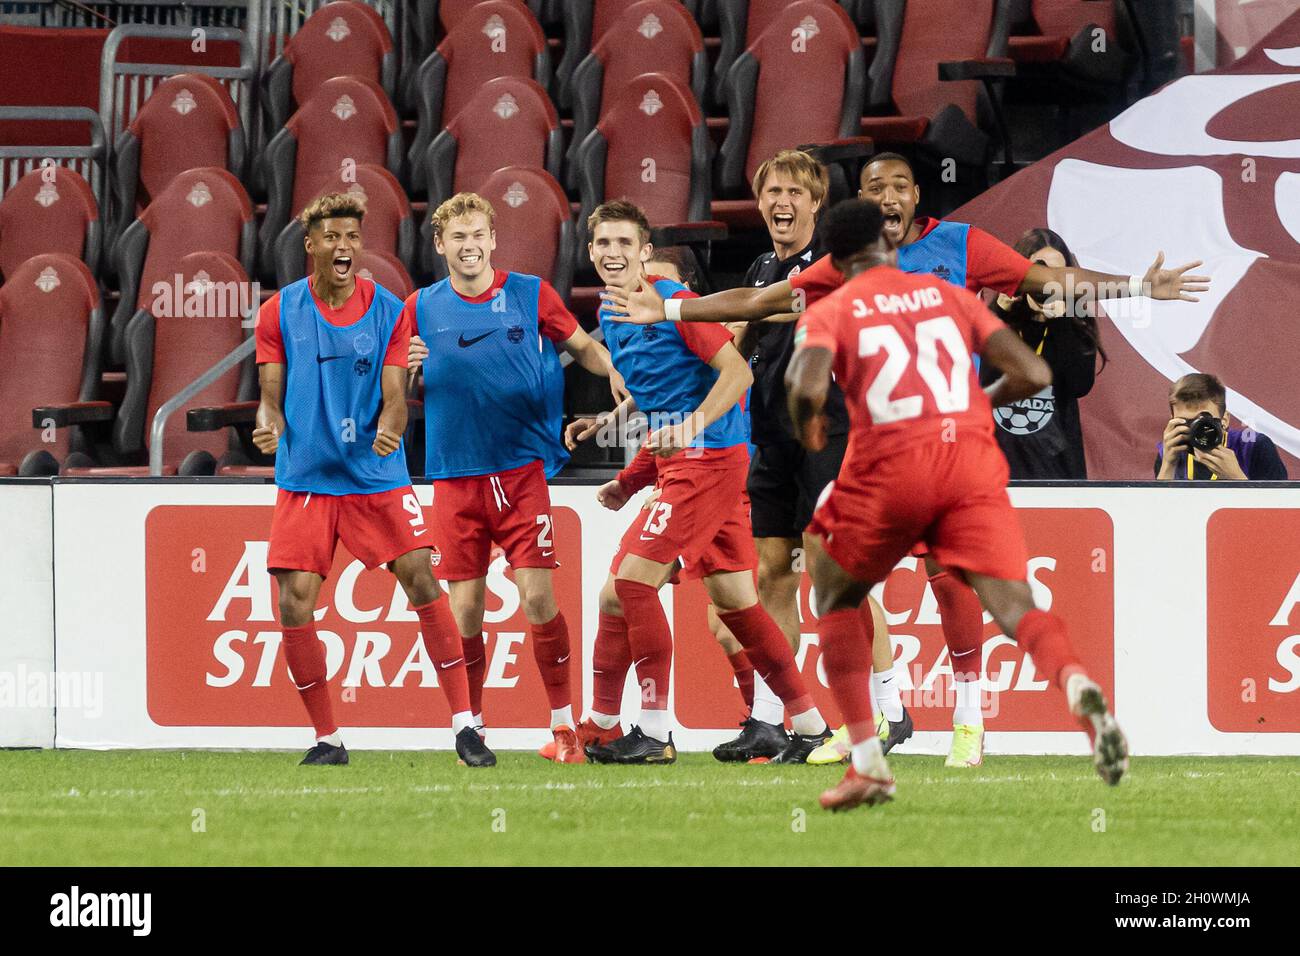 Toronto, Canada, October 13, 2021: Jonathan David, No.20, of Team Canada runs to his teammates to celebrate after scoring a goal during the CONCACAF FIFA World Cup Qualifying 2022 match against Panama at BMO Field in Toronto, Canada. Canada won the match 4-1. Credit: Phamai Techaphan/Alamy Live News Stock Photo